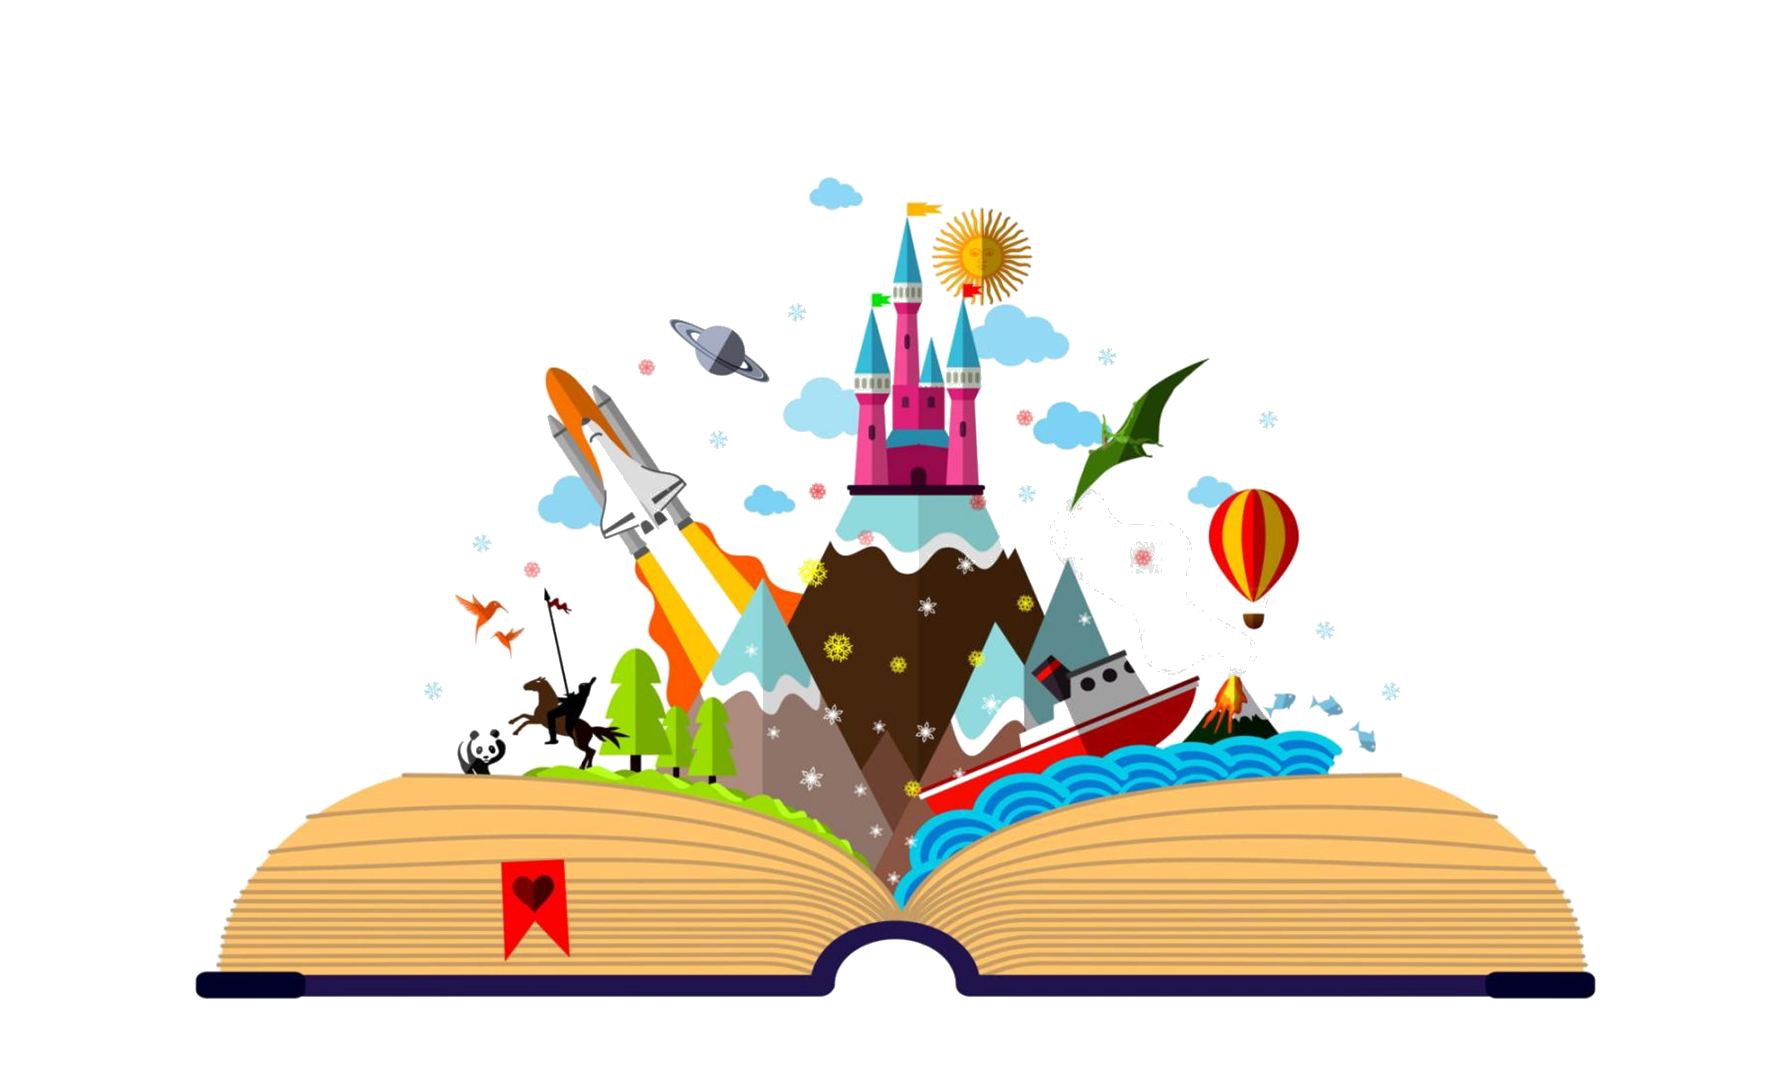 An illustration of an open book with a castle and other fantastical things coming out of the pages.